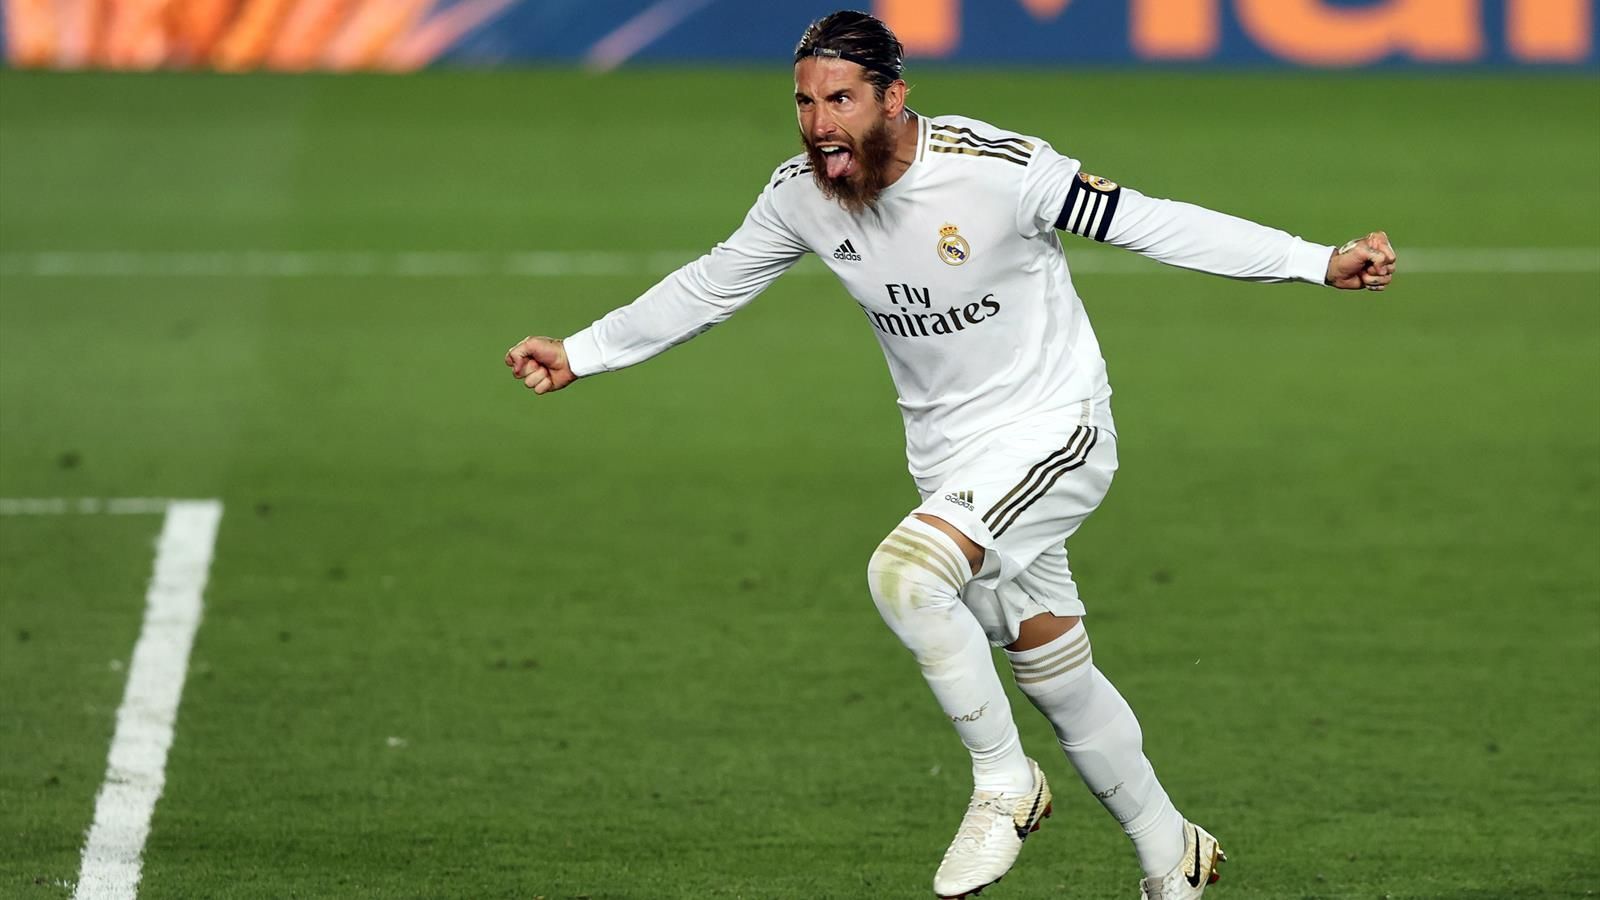 Real Madrid Indebted to Captain Sergio Ramos for their Victory against Getafe